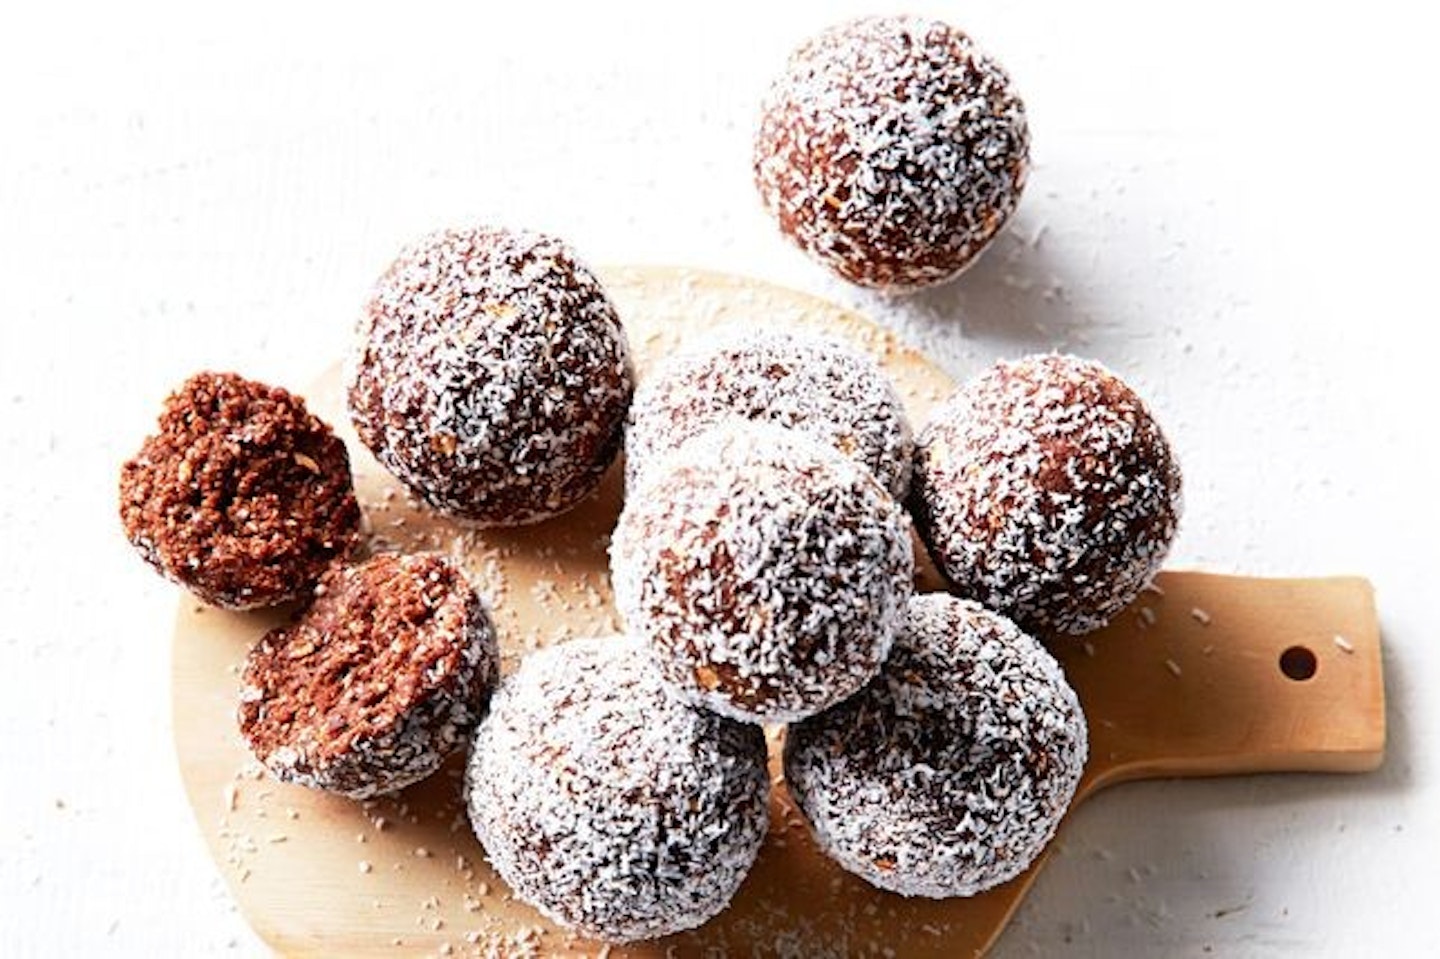 Cacao coconut bliss balls